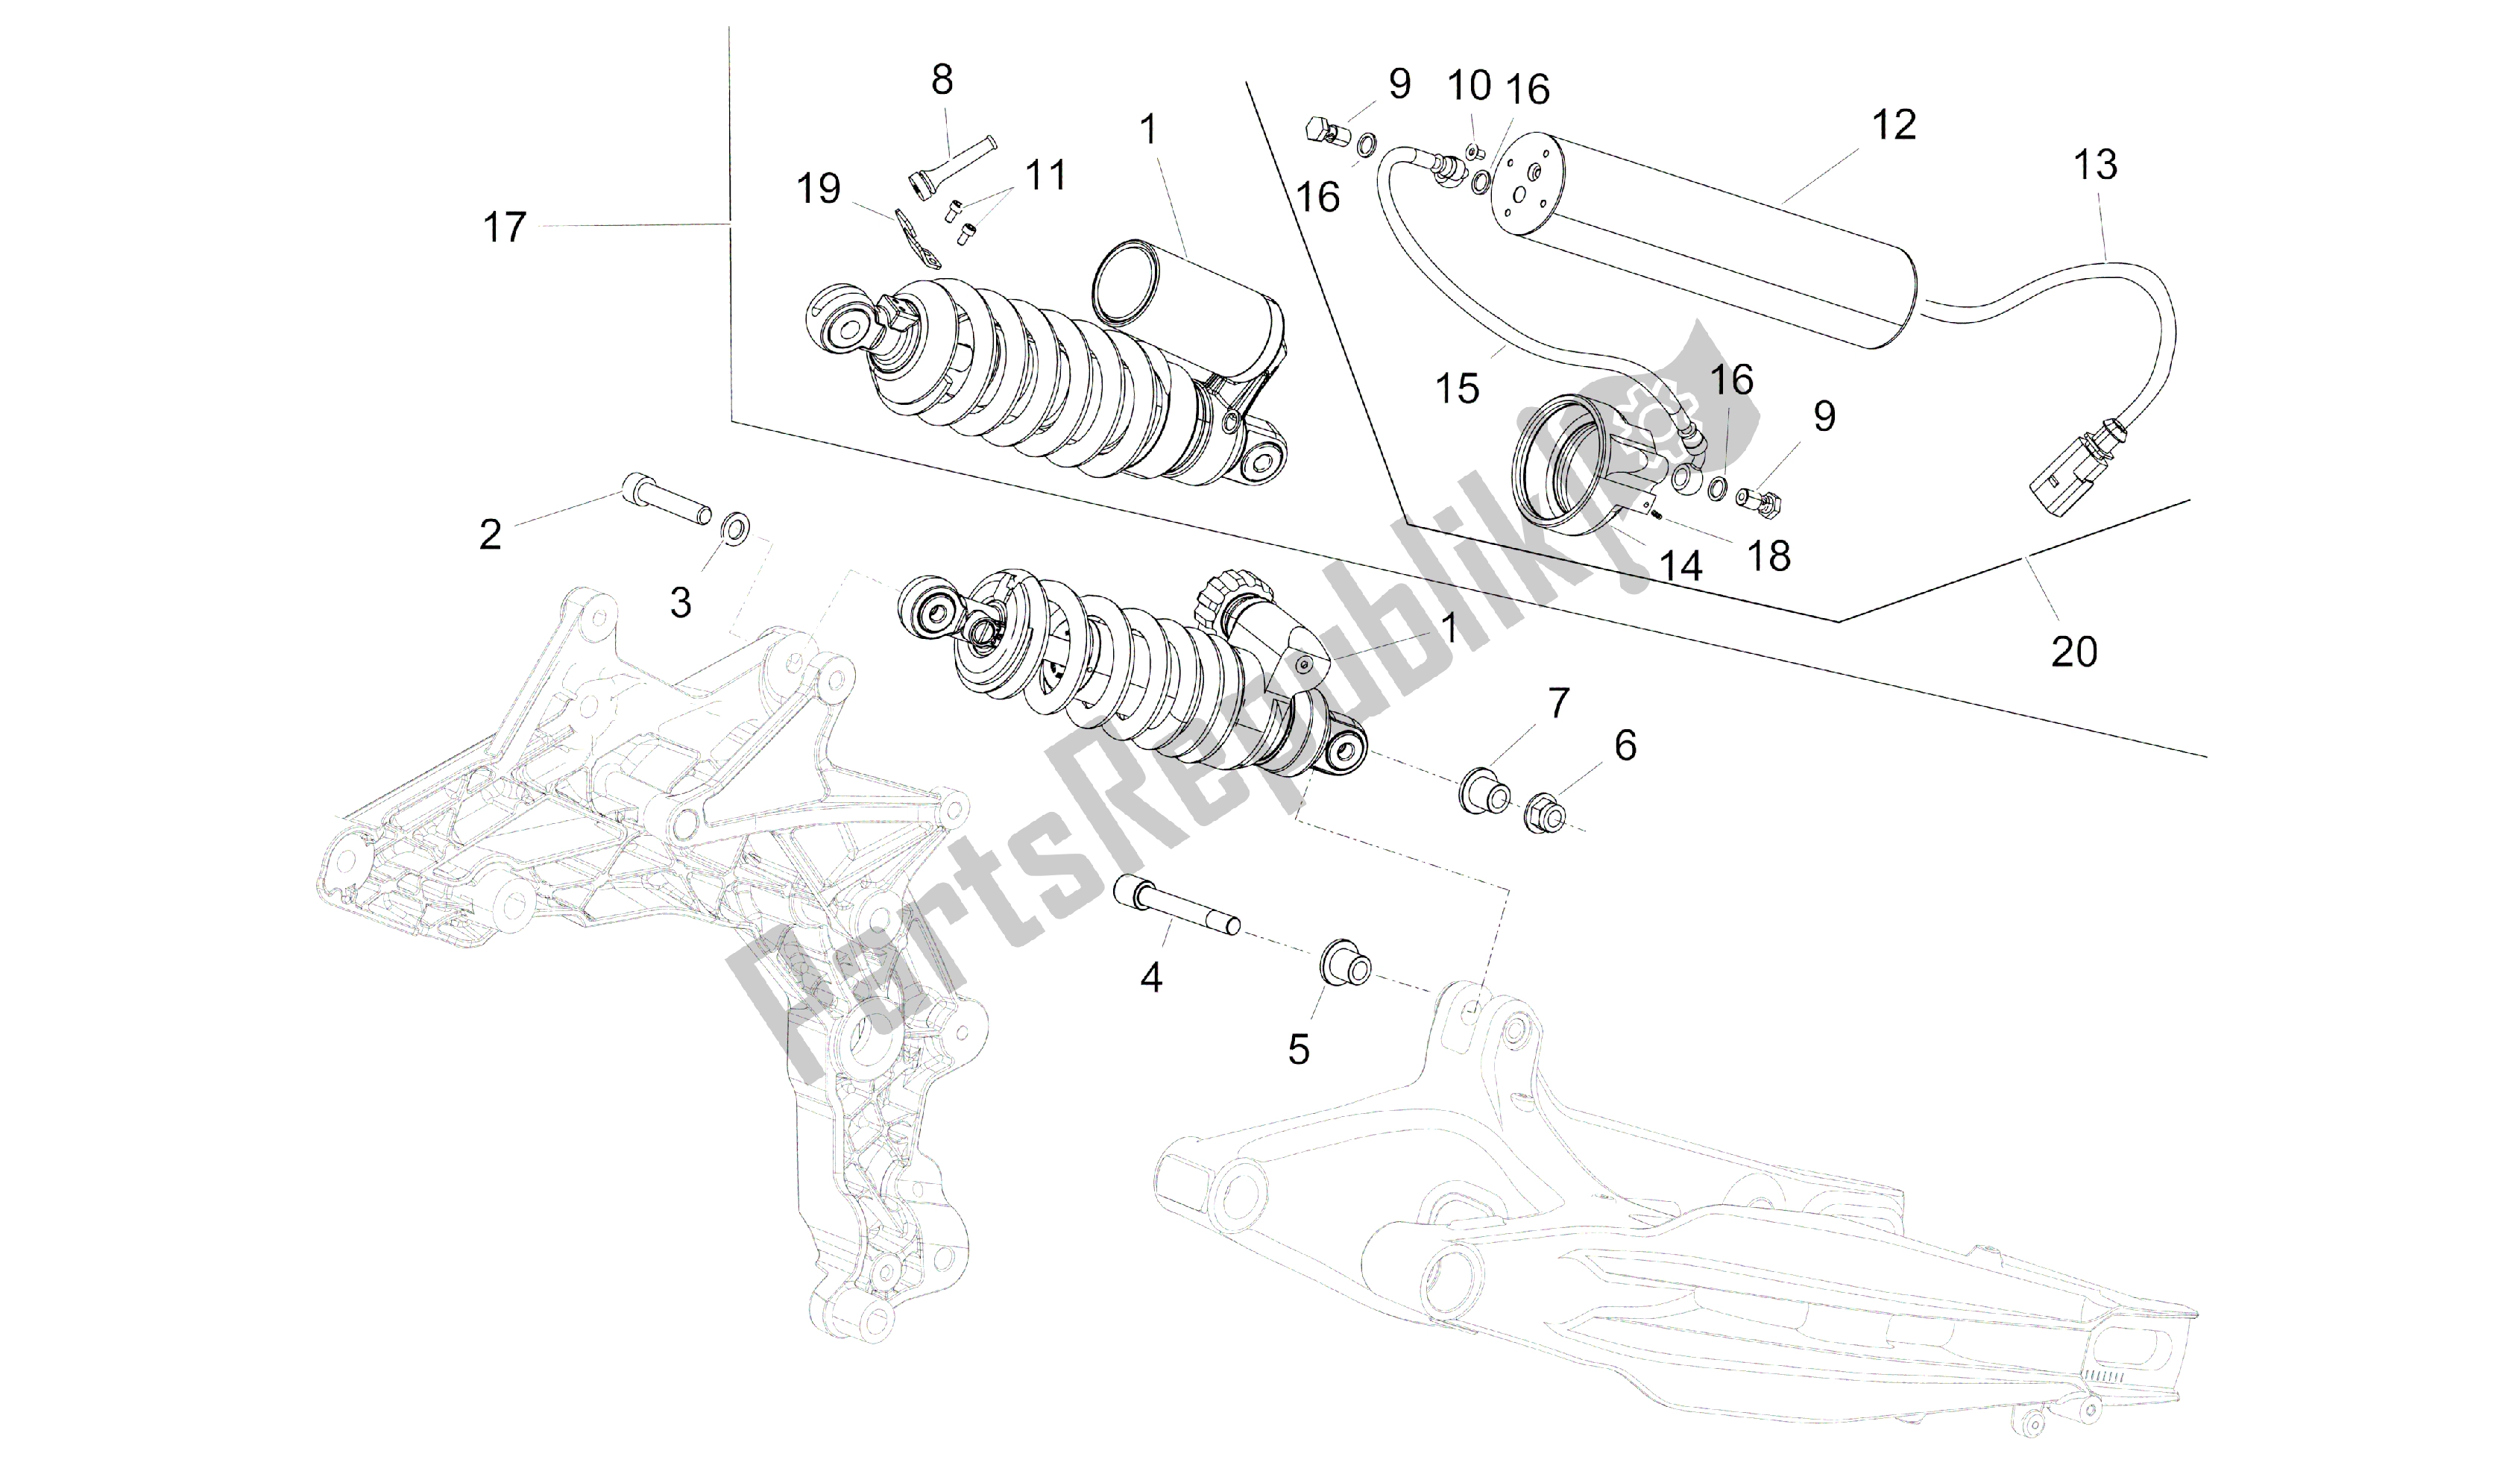 All parts for the Shock Absorber of the Aprilia Caponord 1200 2013 - 2015